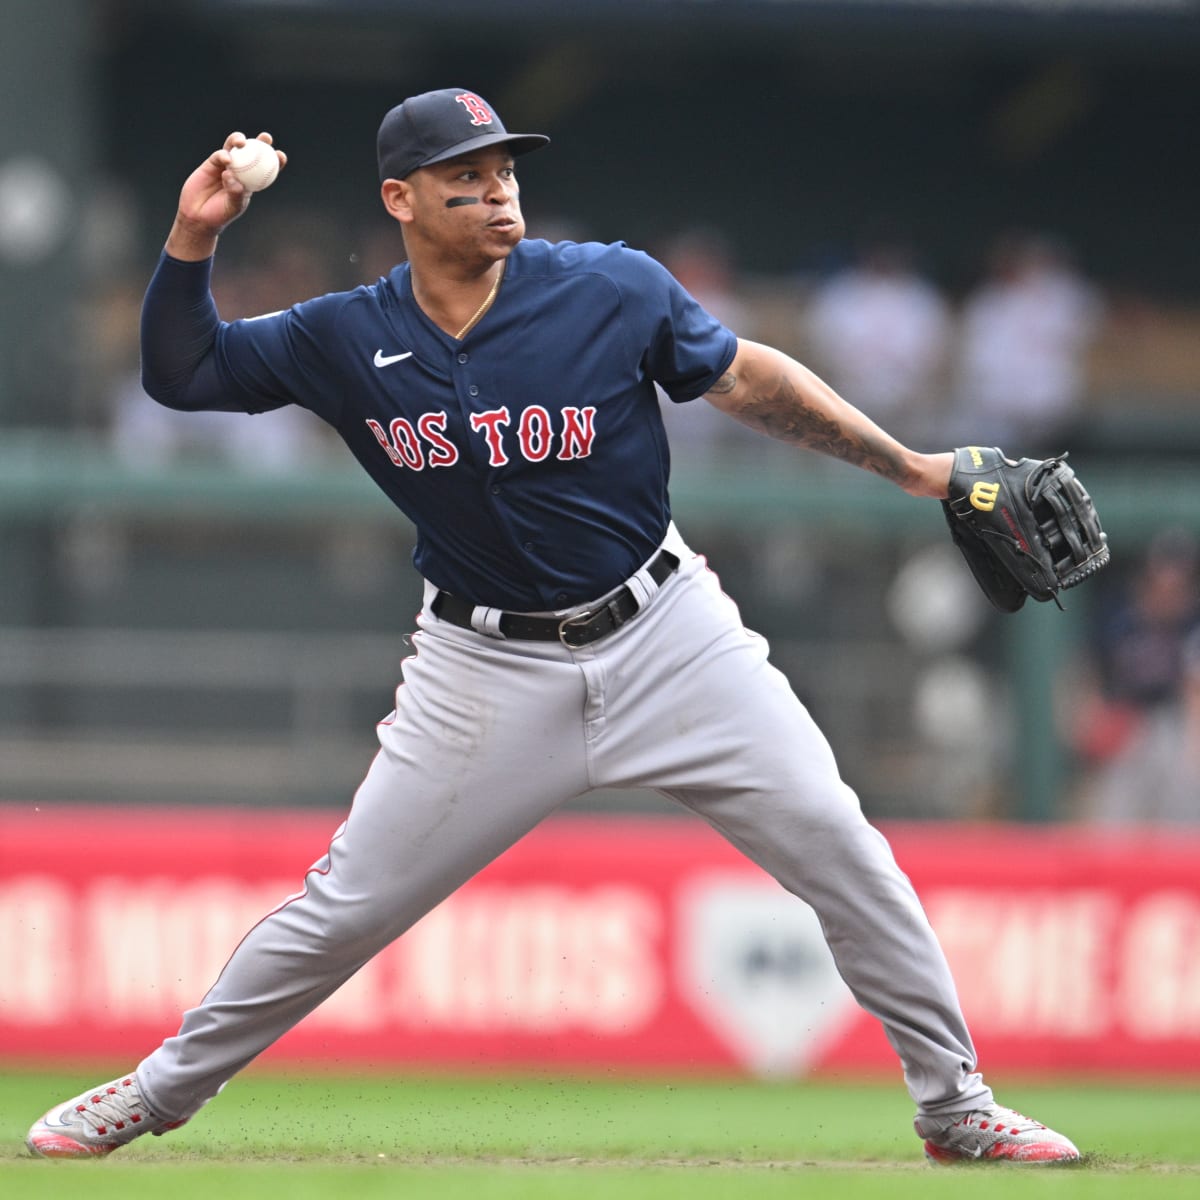 Yankees at Red Sox Free Live Stream MLB Online, Channel, Time - How to Watch and Stream Major League and College Sports